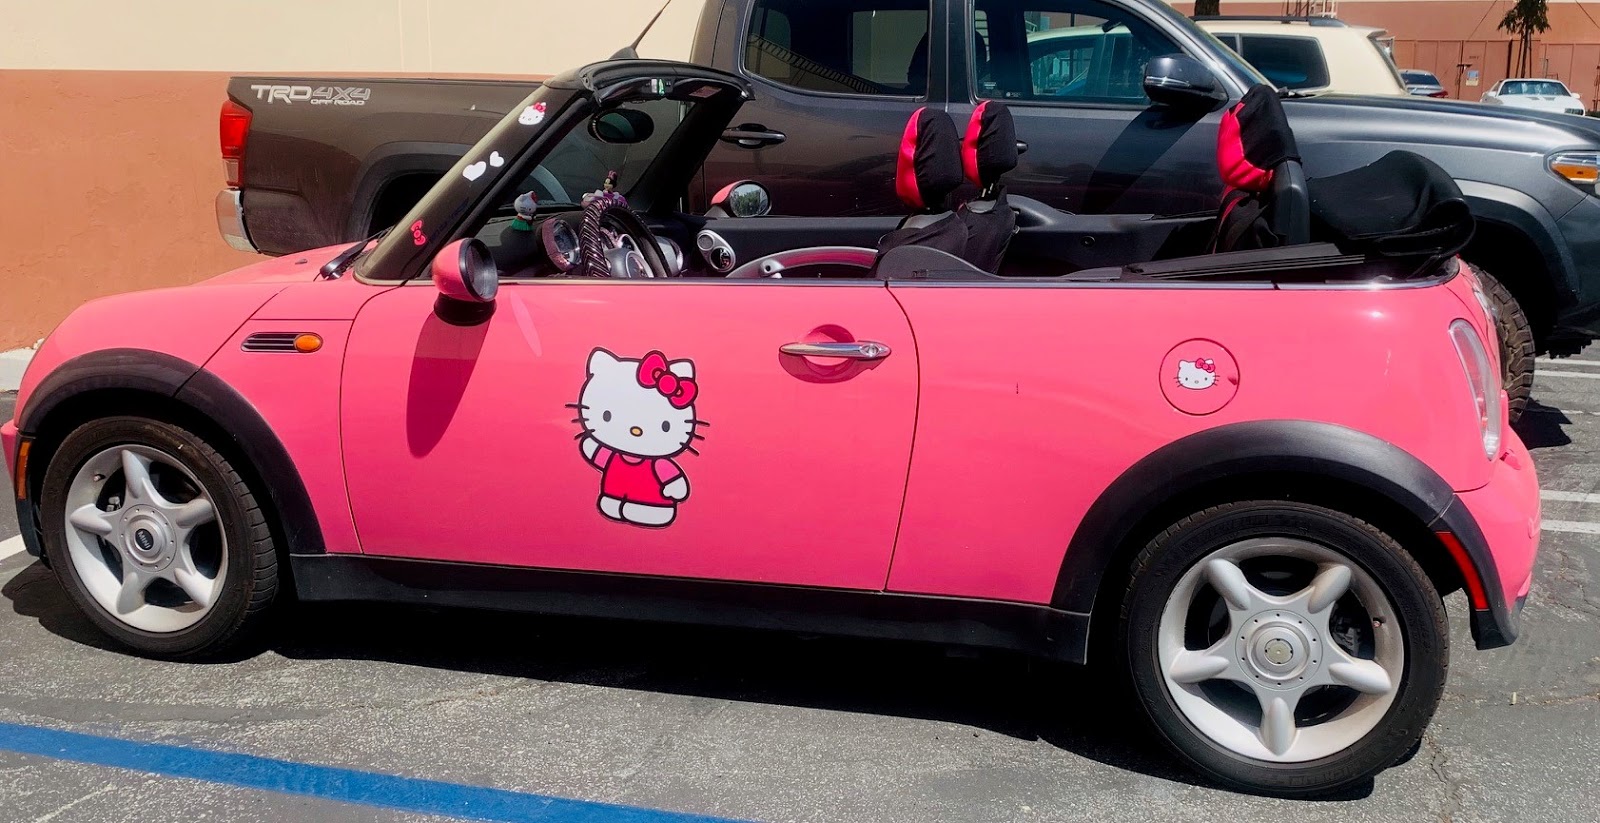 Thinking Pink: Cute Car Day